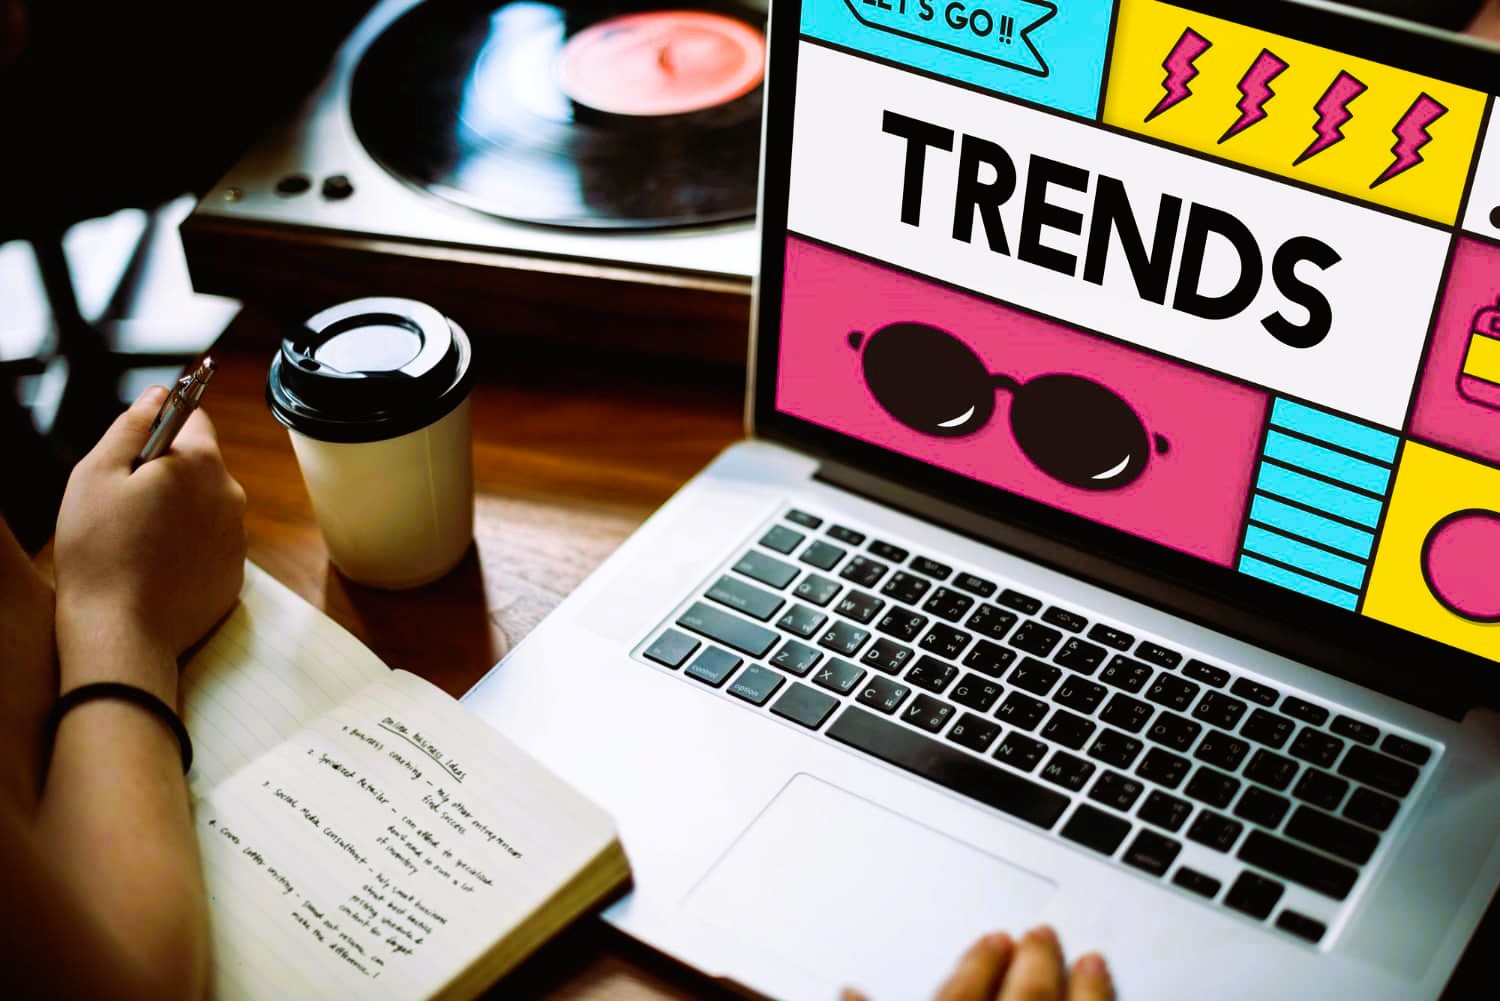 Web Design Trends to Watch in the Coming Year